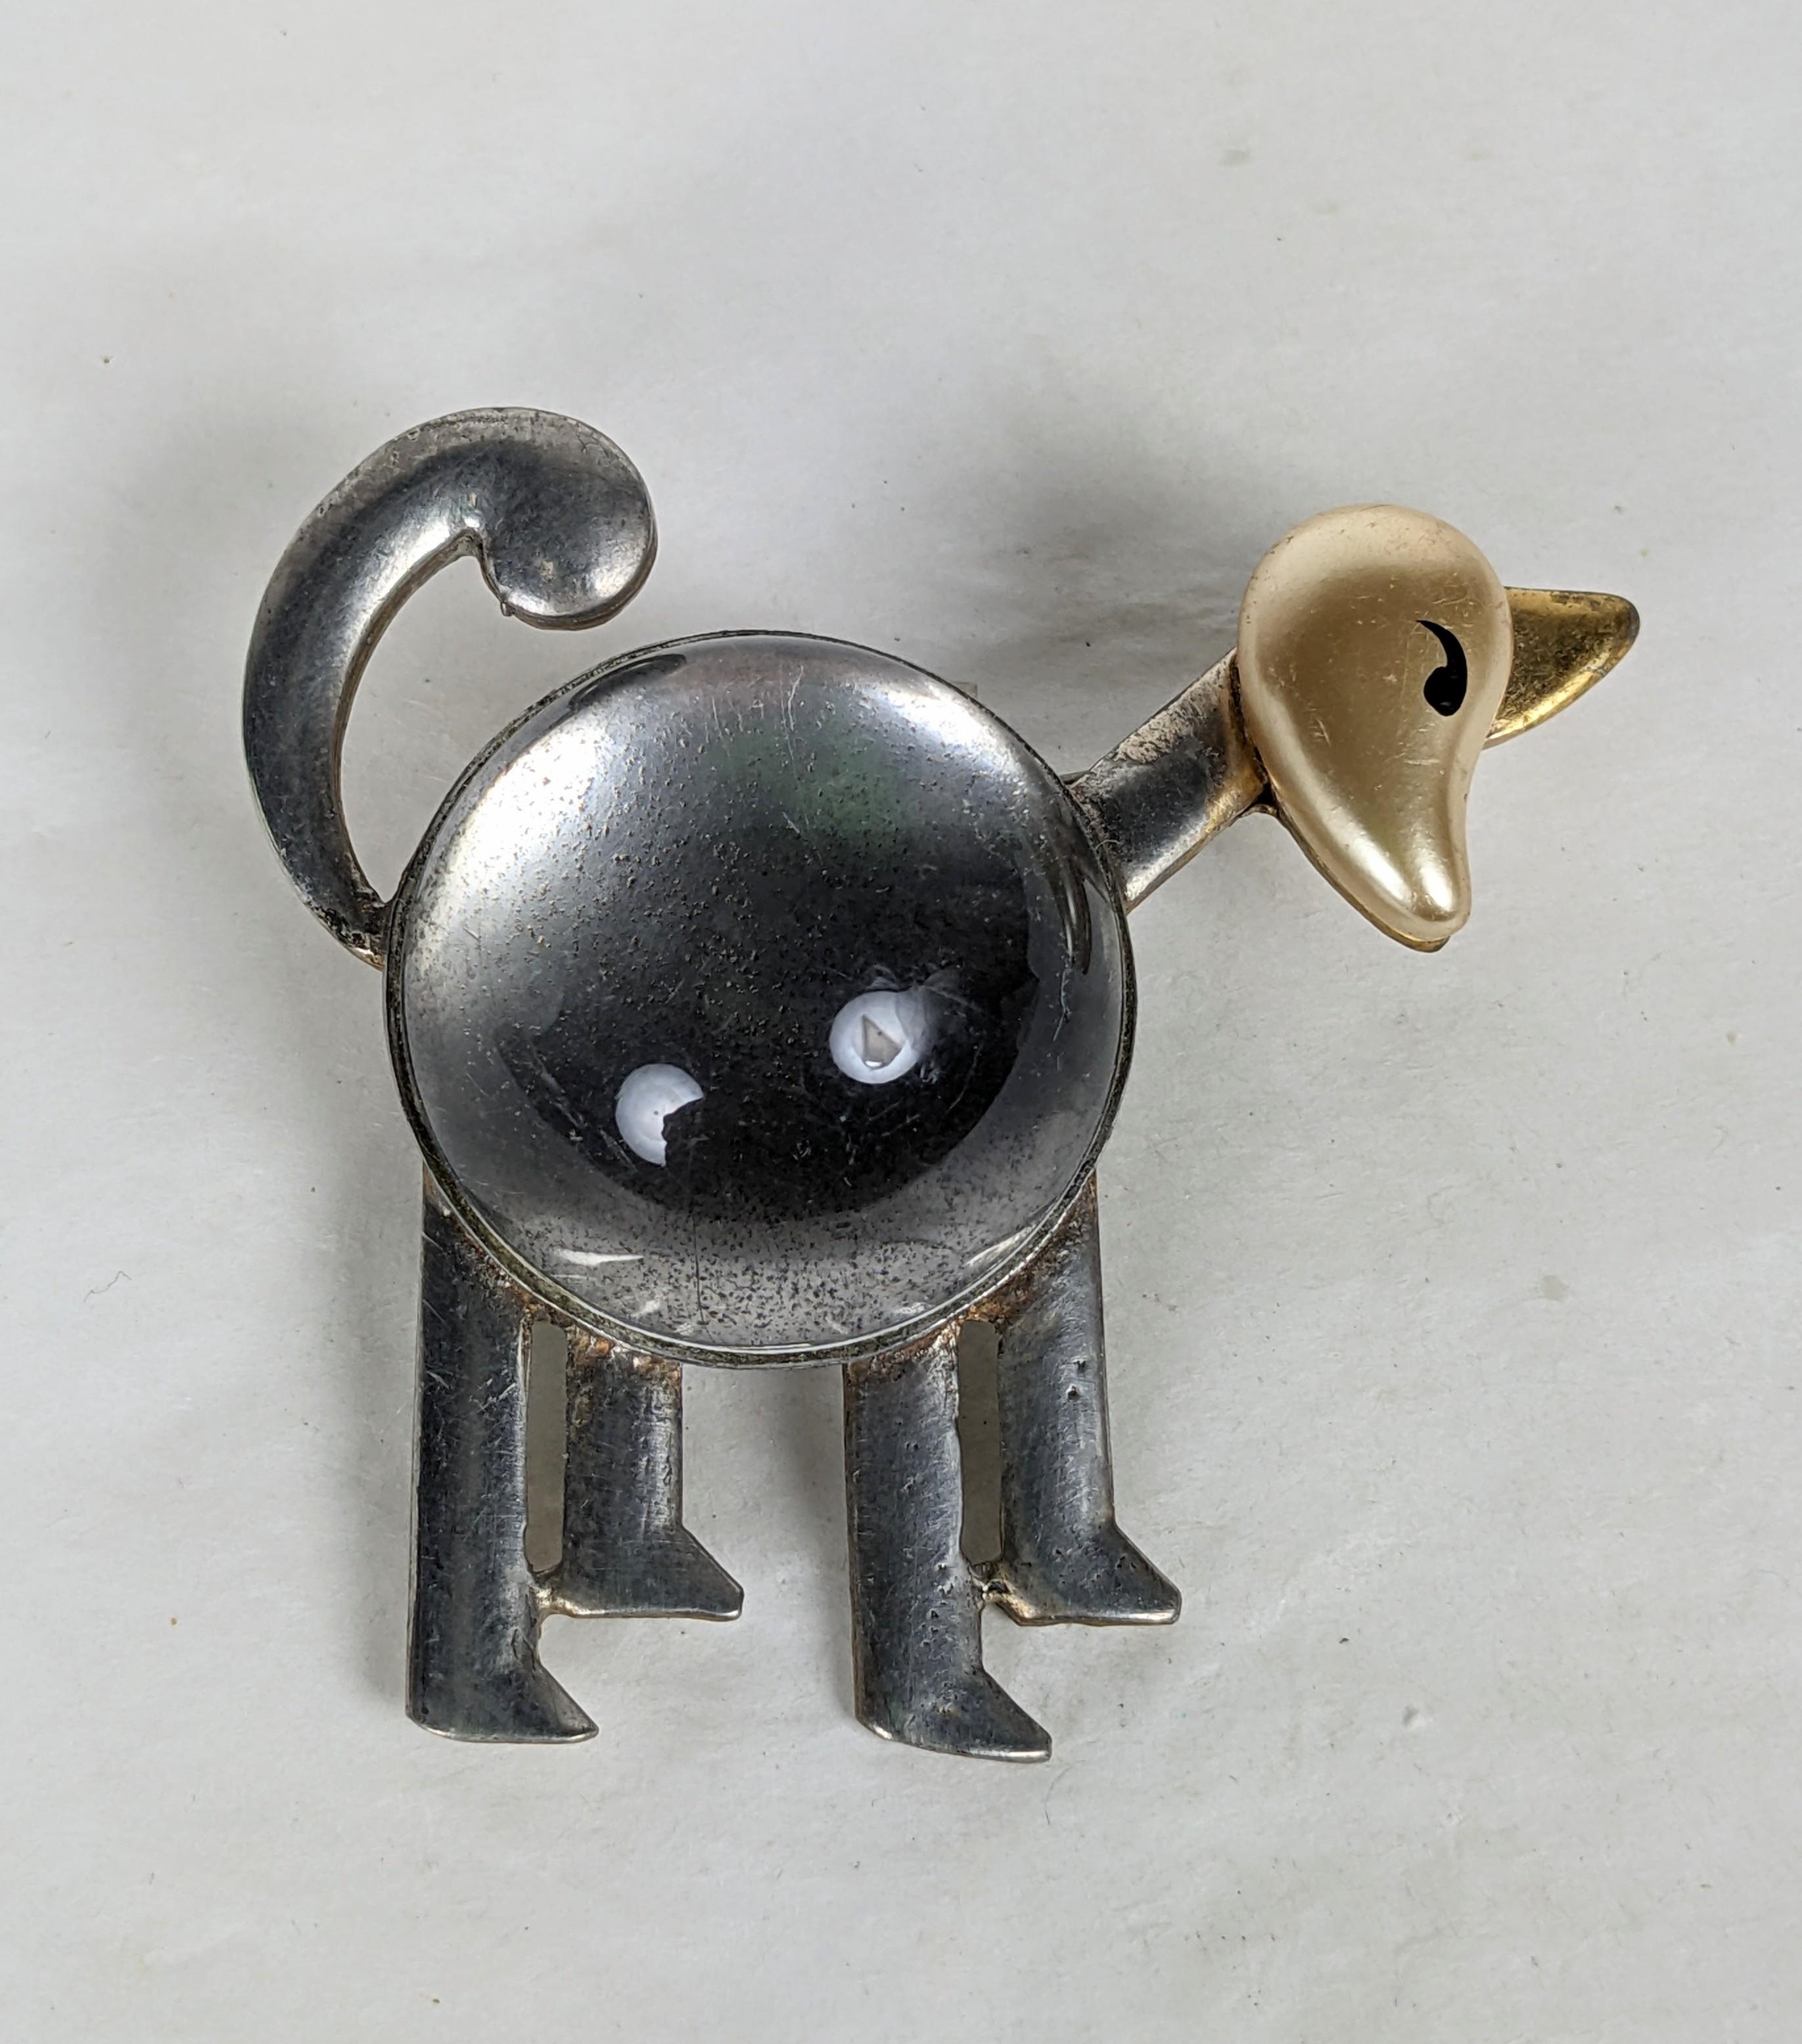 Charming Art Deco Jelly Belly Figural Brooch from the 1930's. Abstract animal with lucite 